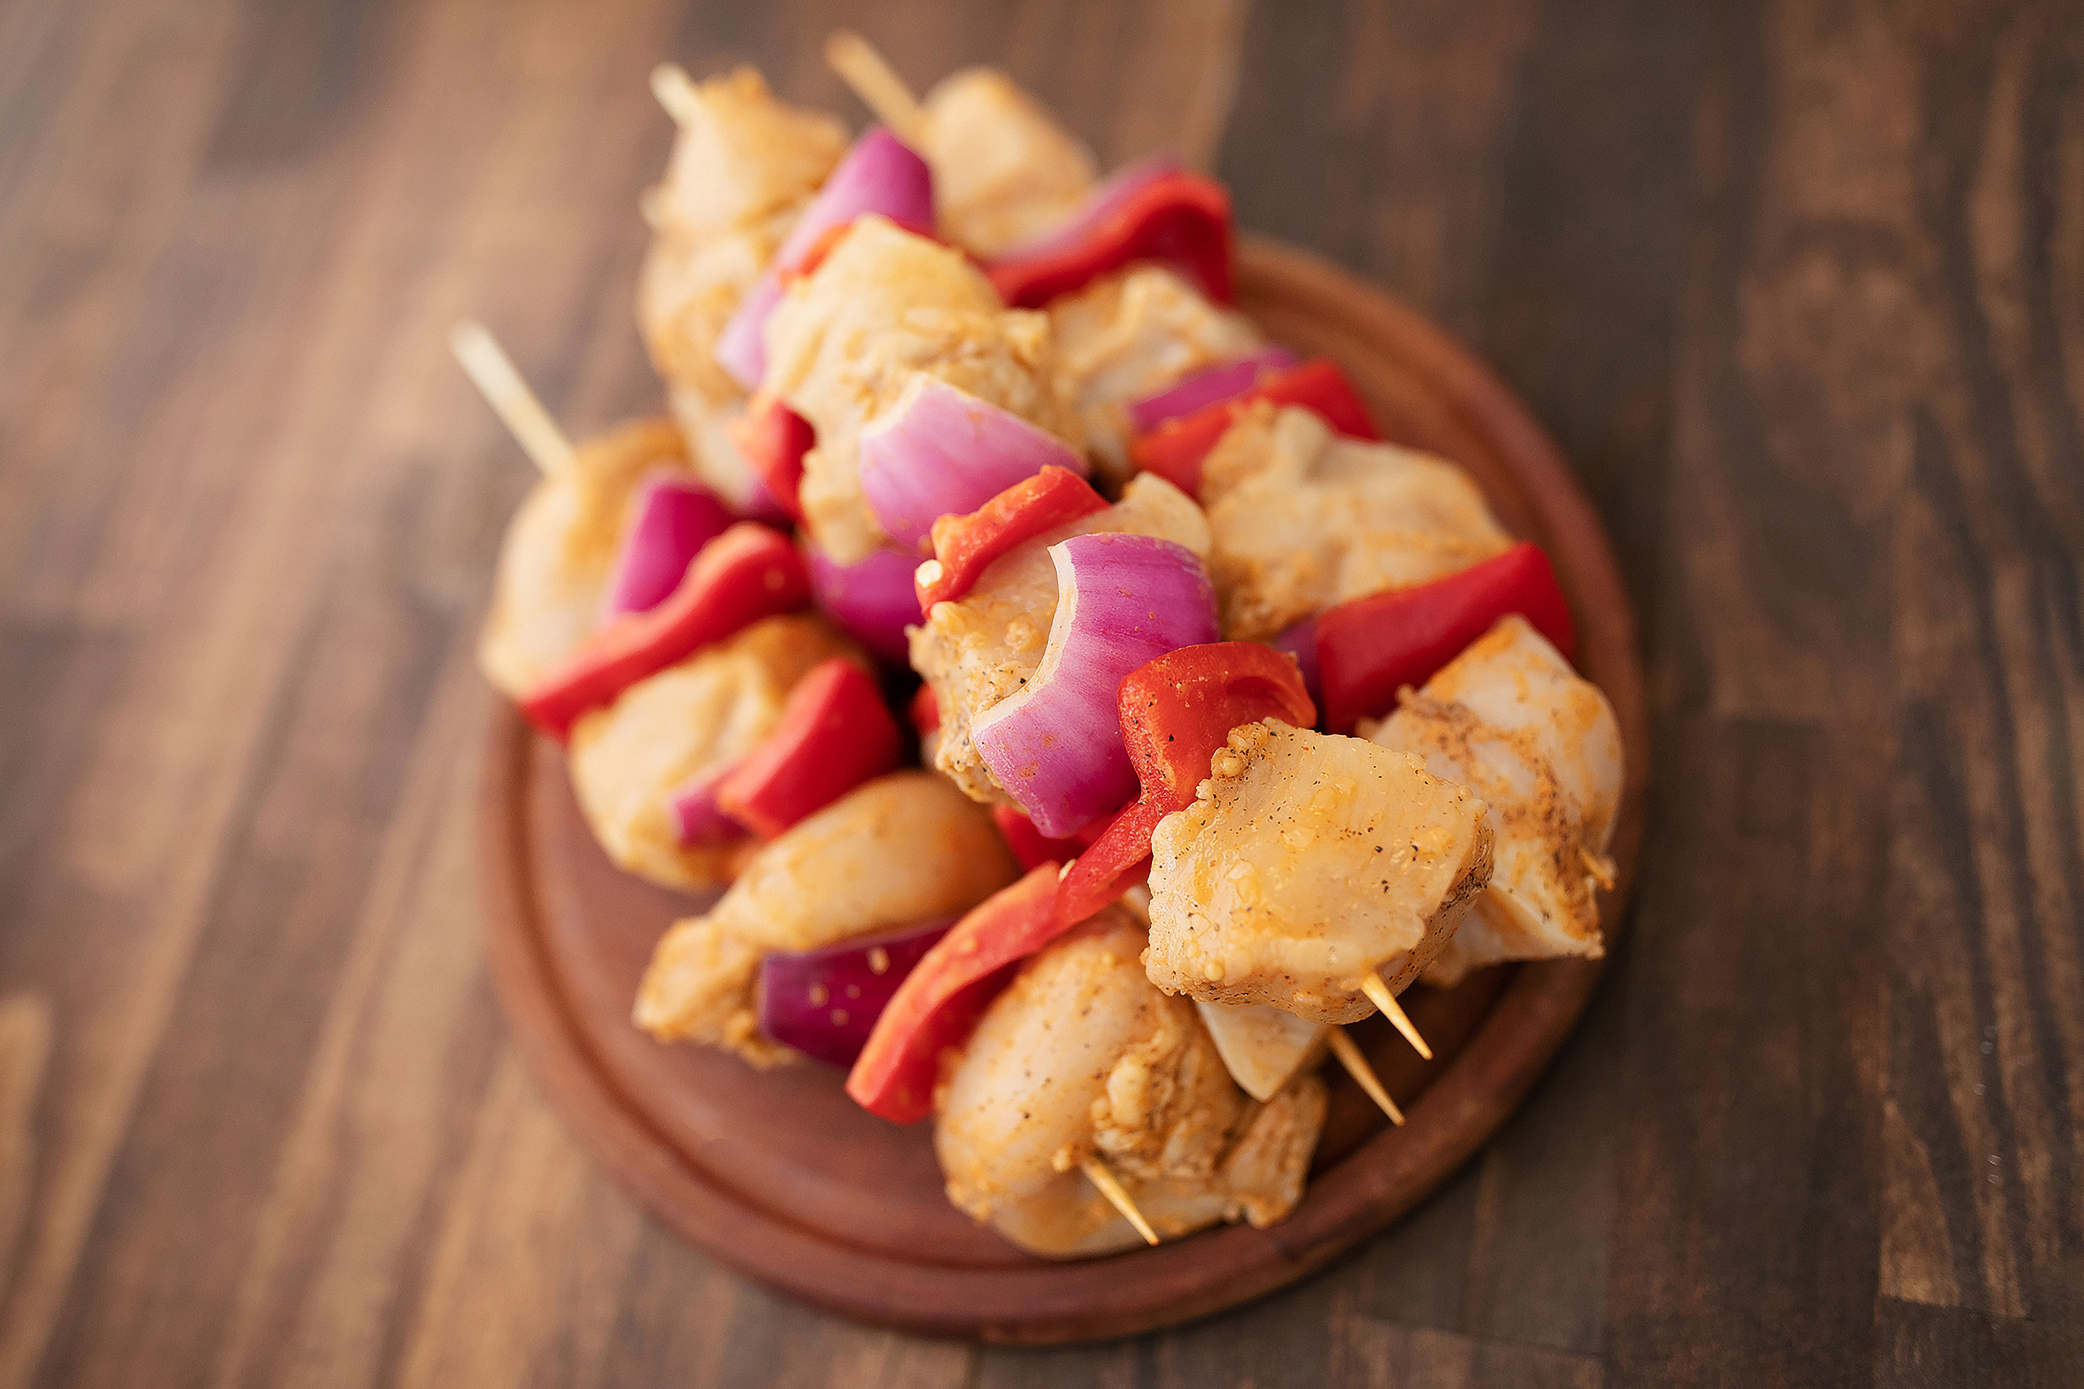 chicken tips and kabob